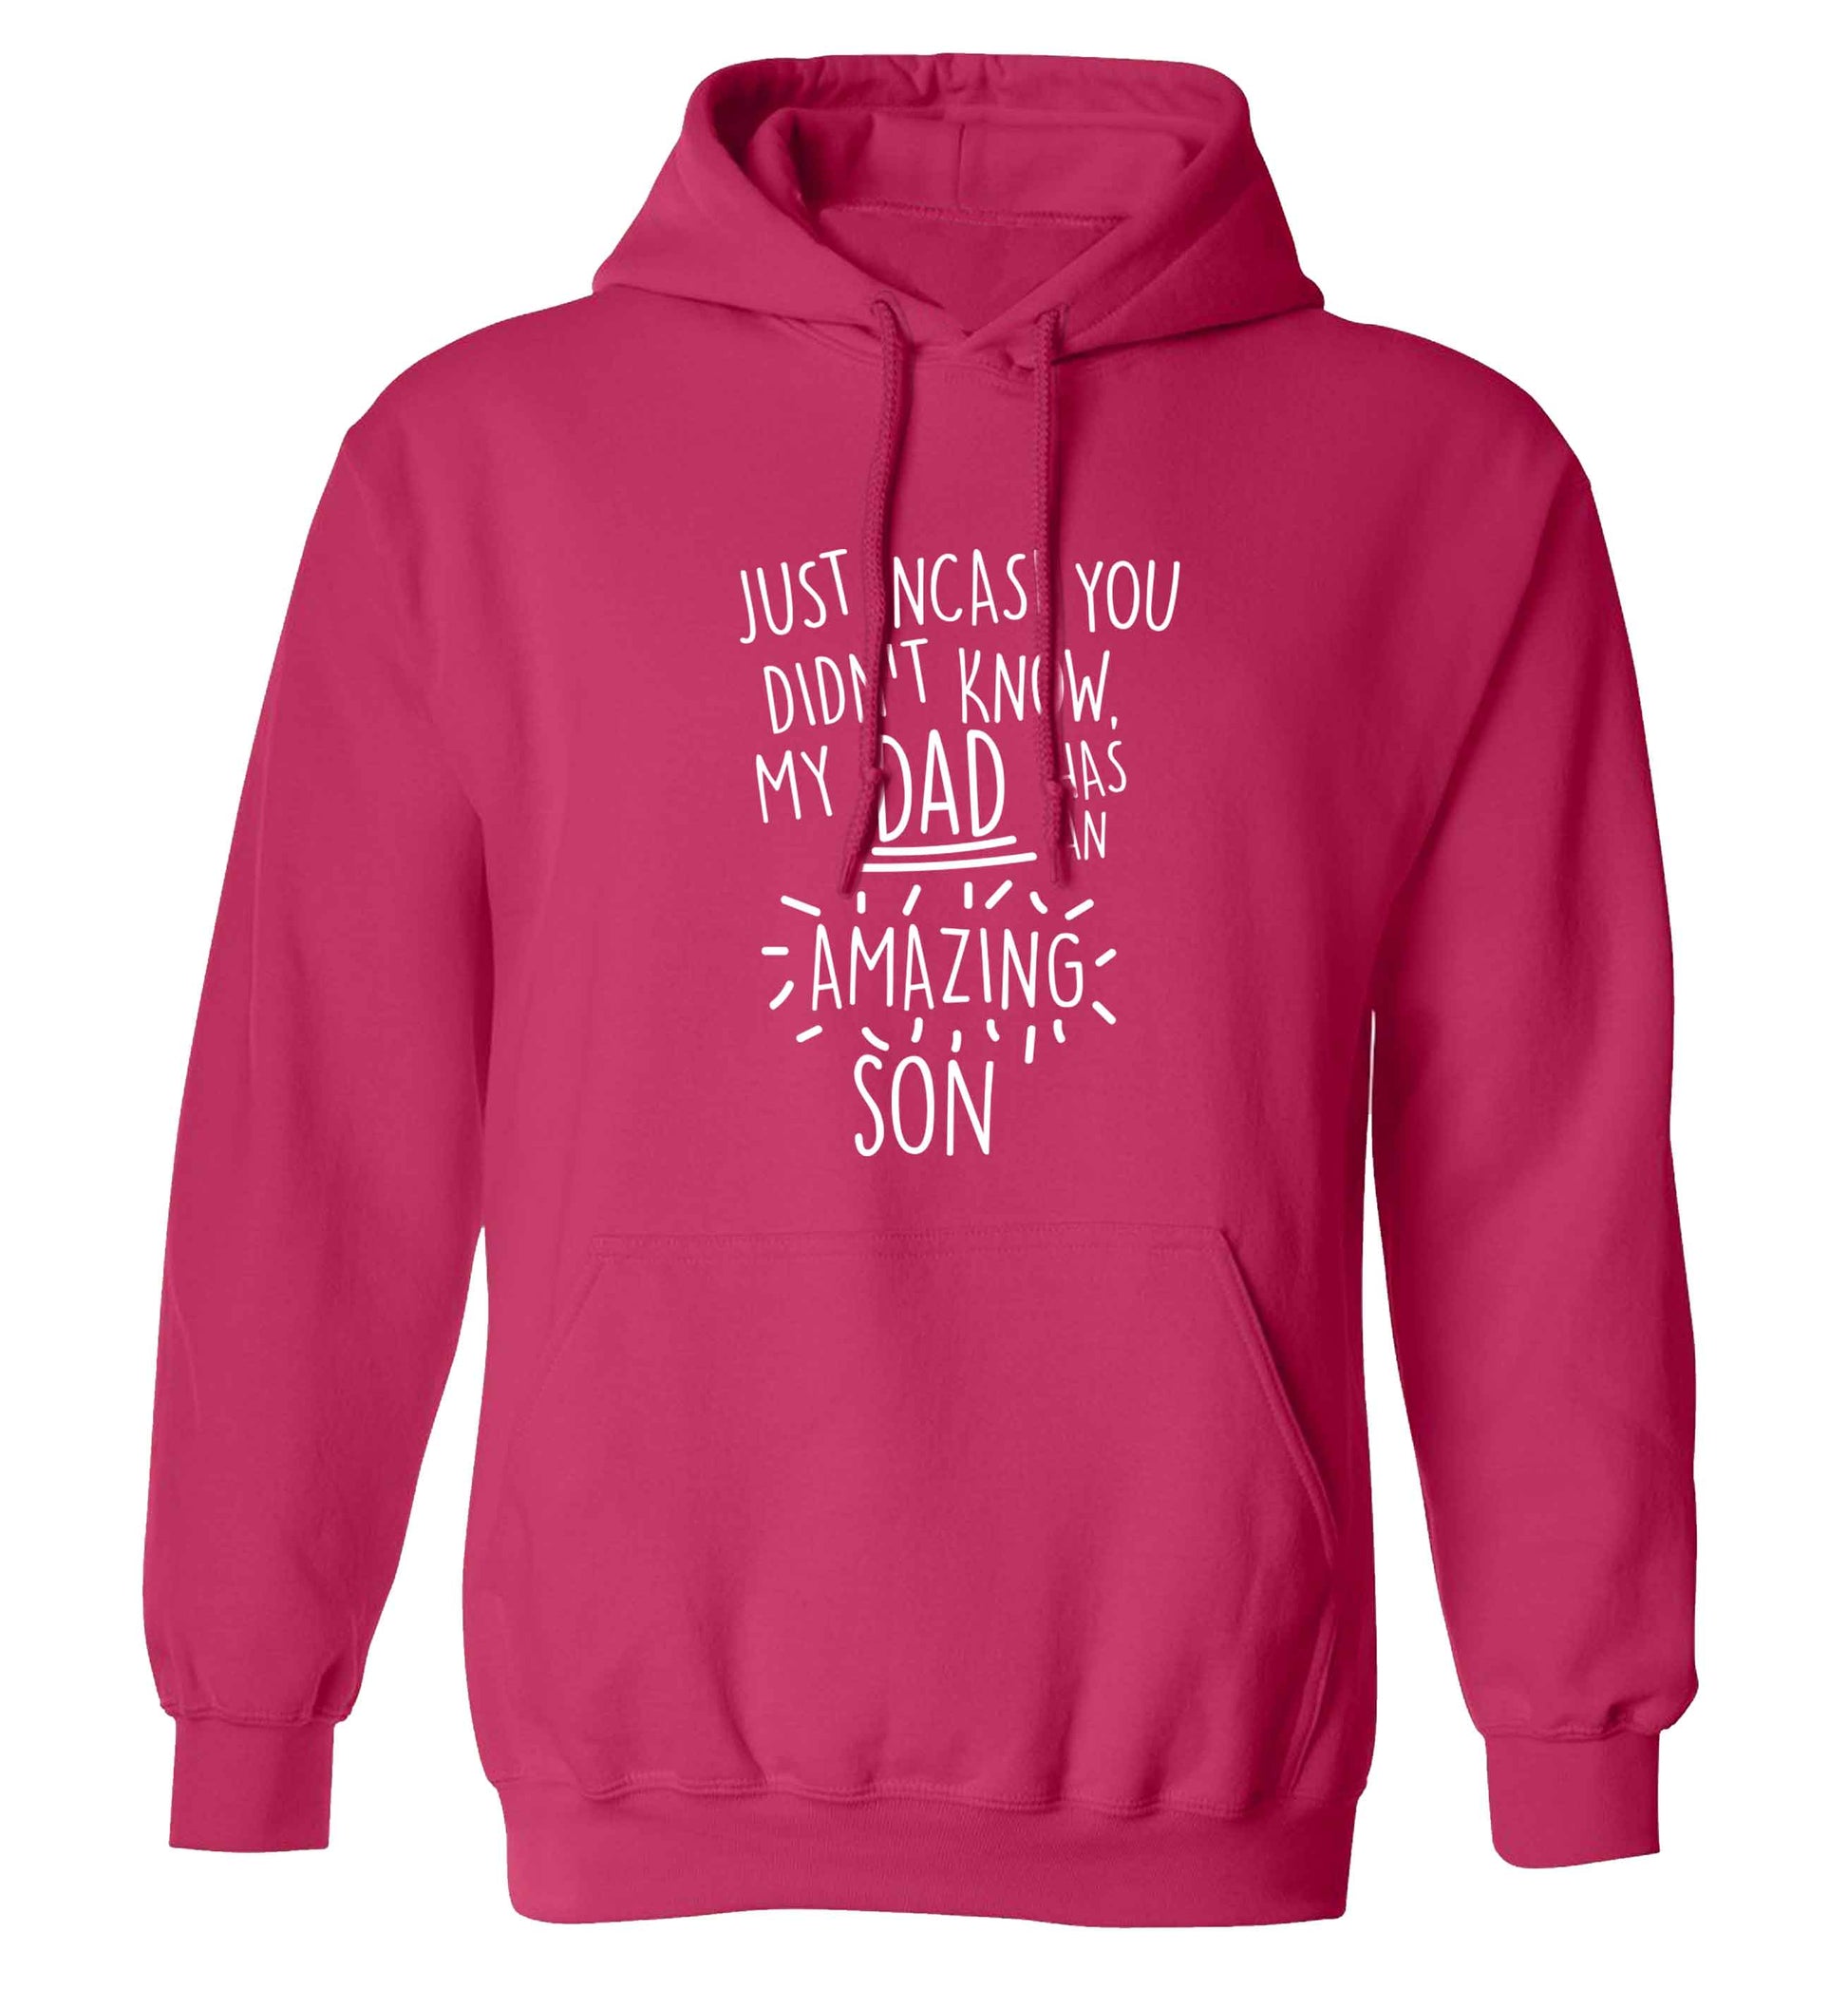 Just incase you didn't know my dad has an amazing son adults unisex pink hoodie 2XL